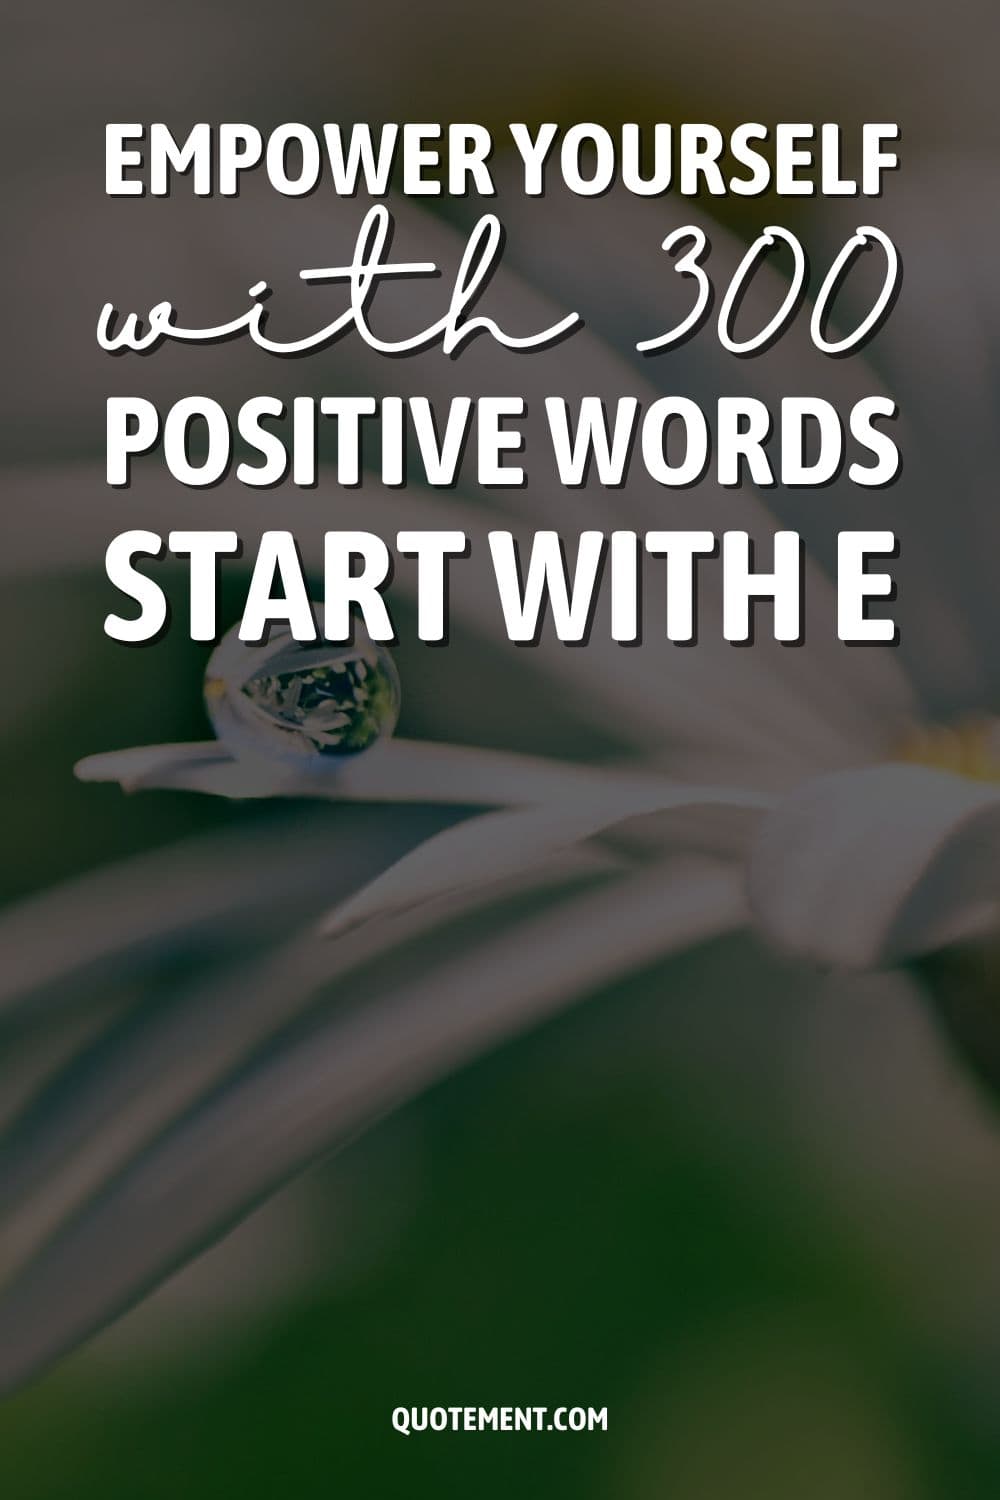 Empower Yourself With 300 Positive Words That Start With E
